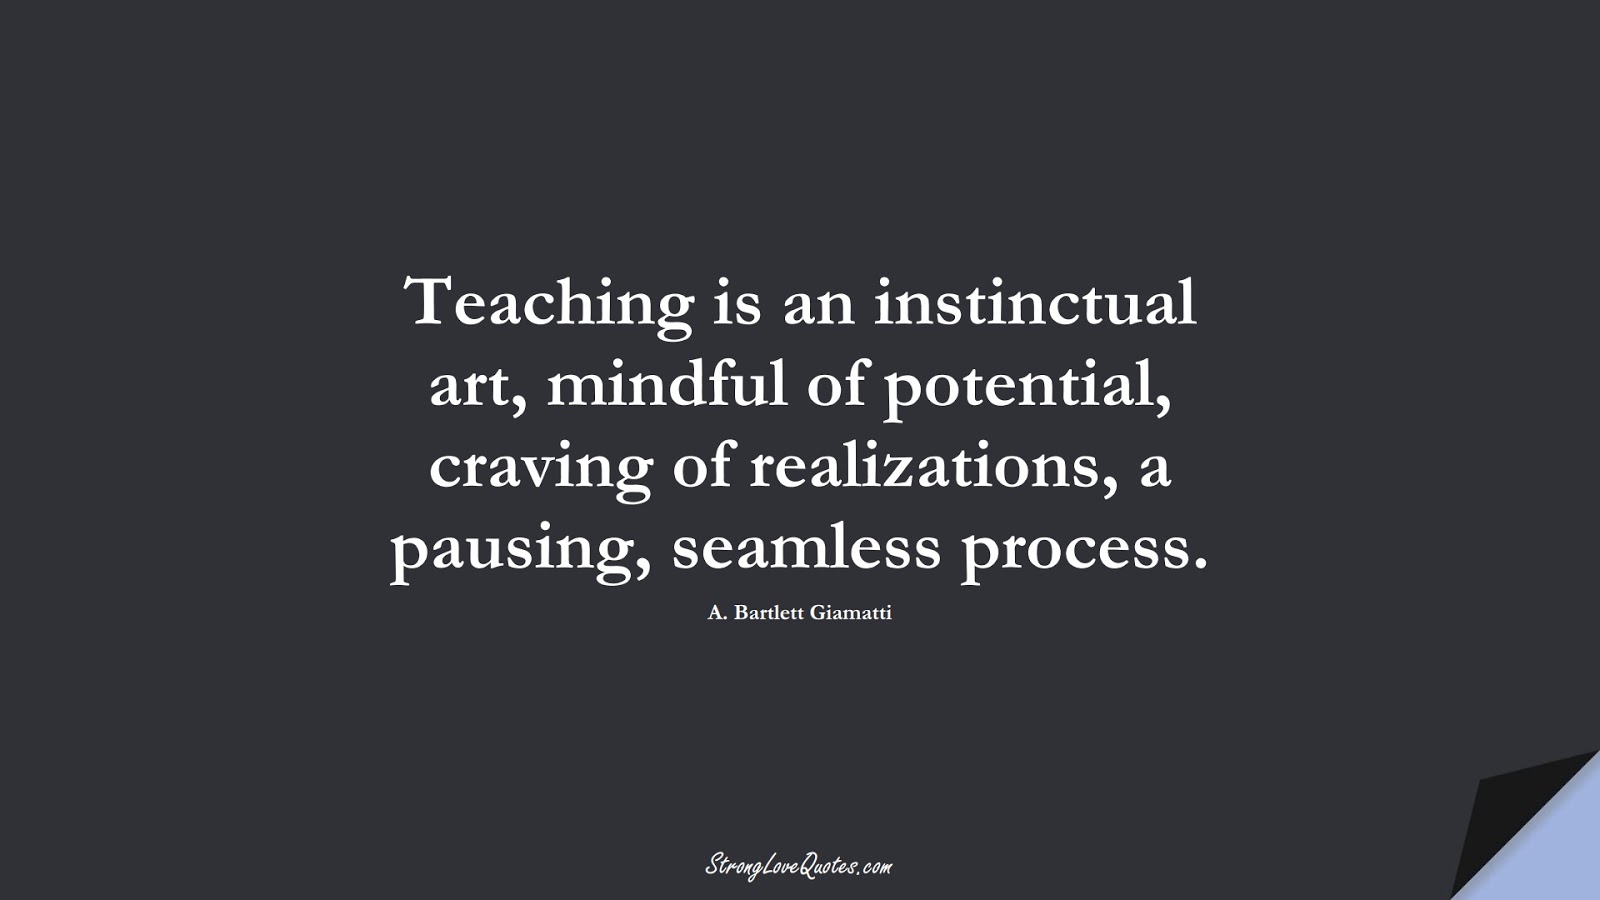 Teaching is an instinctual art, mindful of potential, craving of realizations, a pausing, seamless process. (A. Bartlett Giamatti);  #EducationQuotes